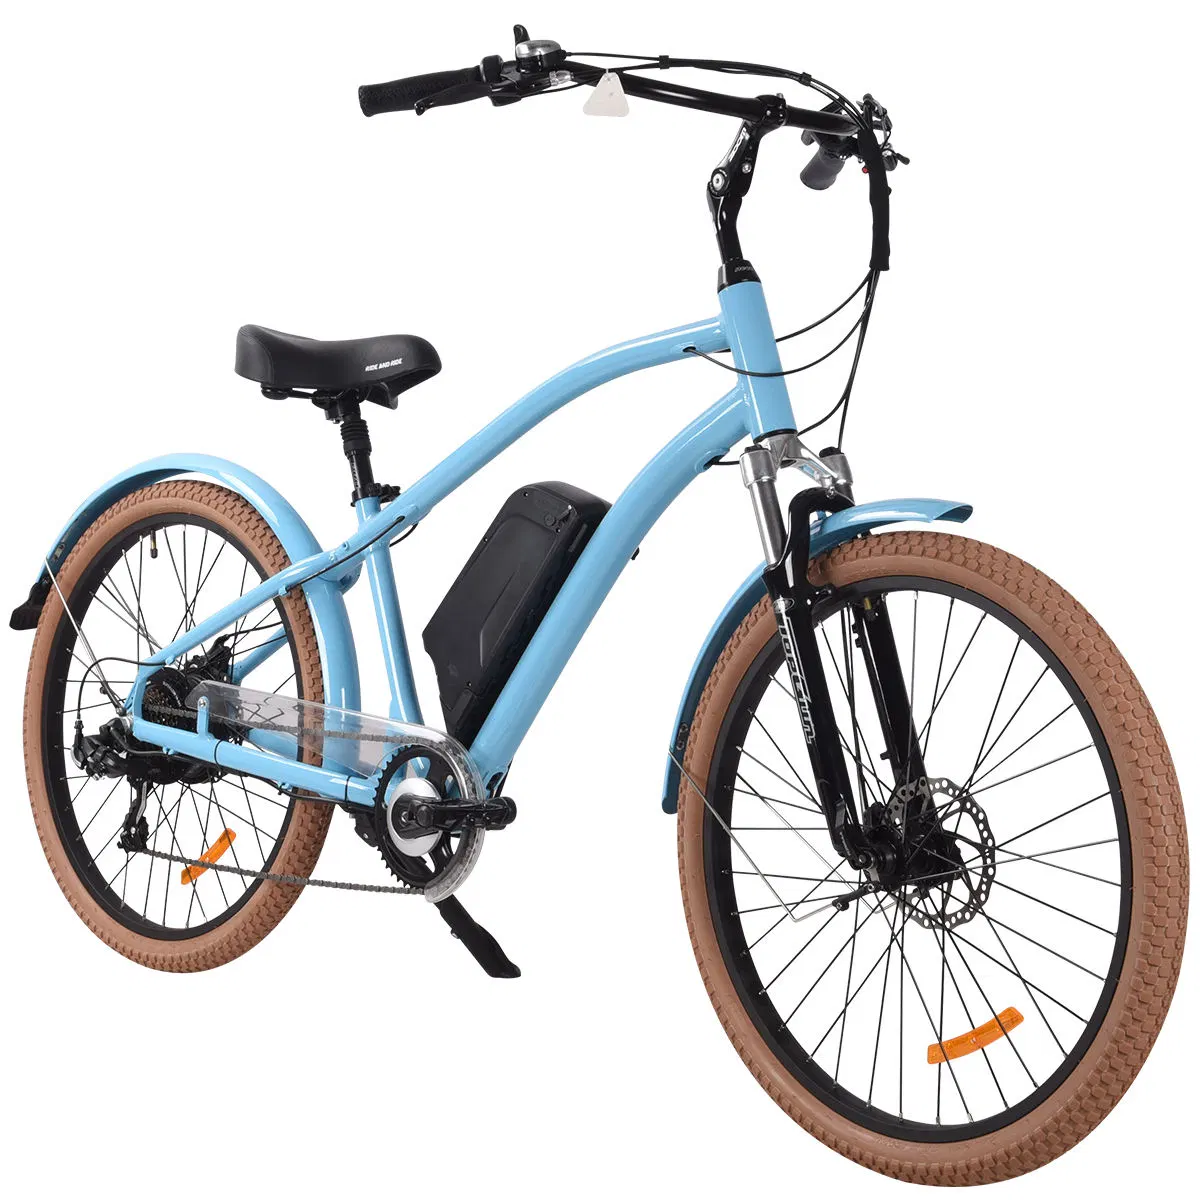 Chinese Factory Lithium Battery Other Bike Atvs Electric City Bicycle with Basket Road Bicicletas Scooter Ebike